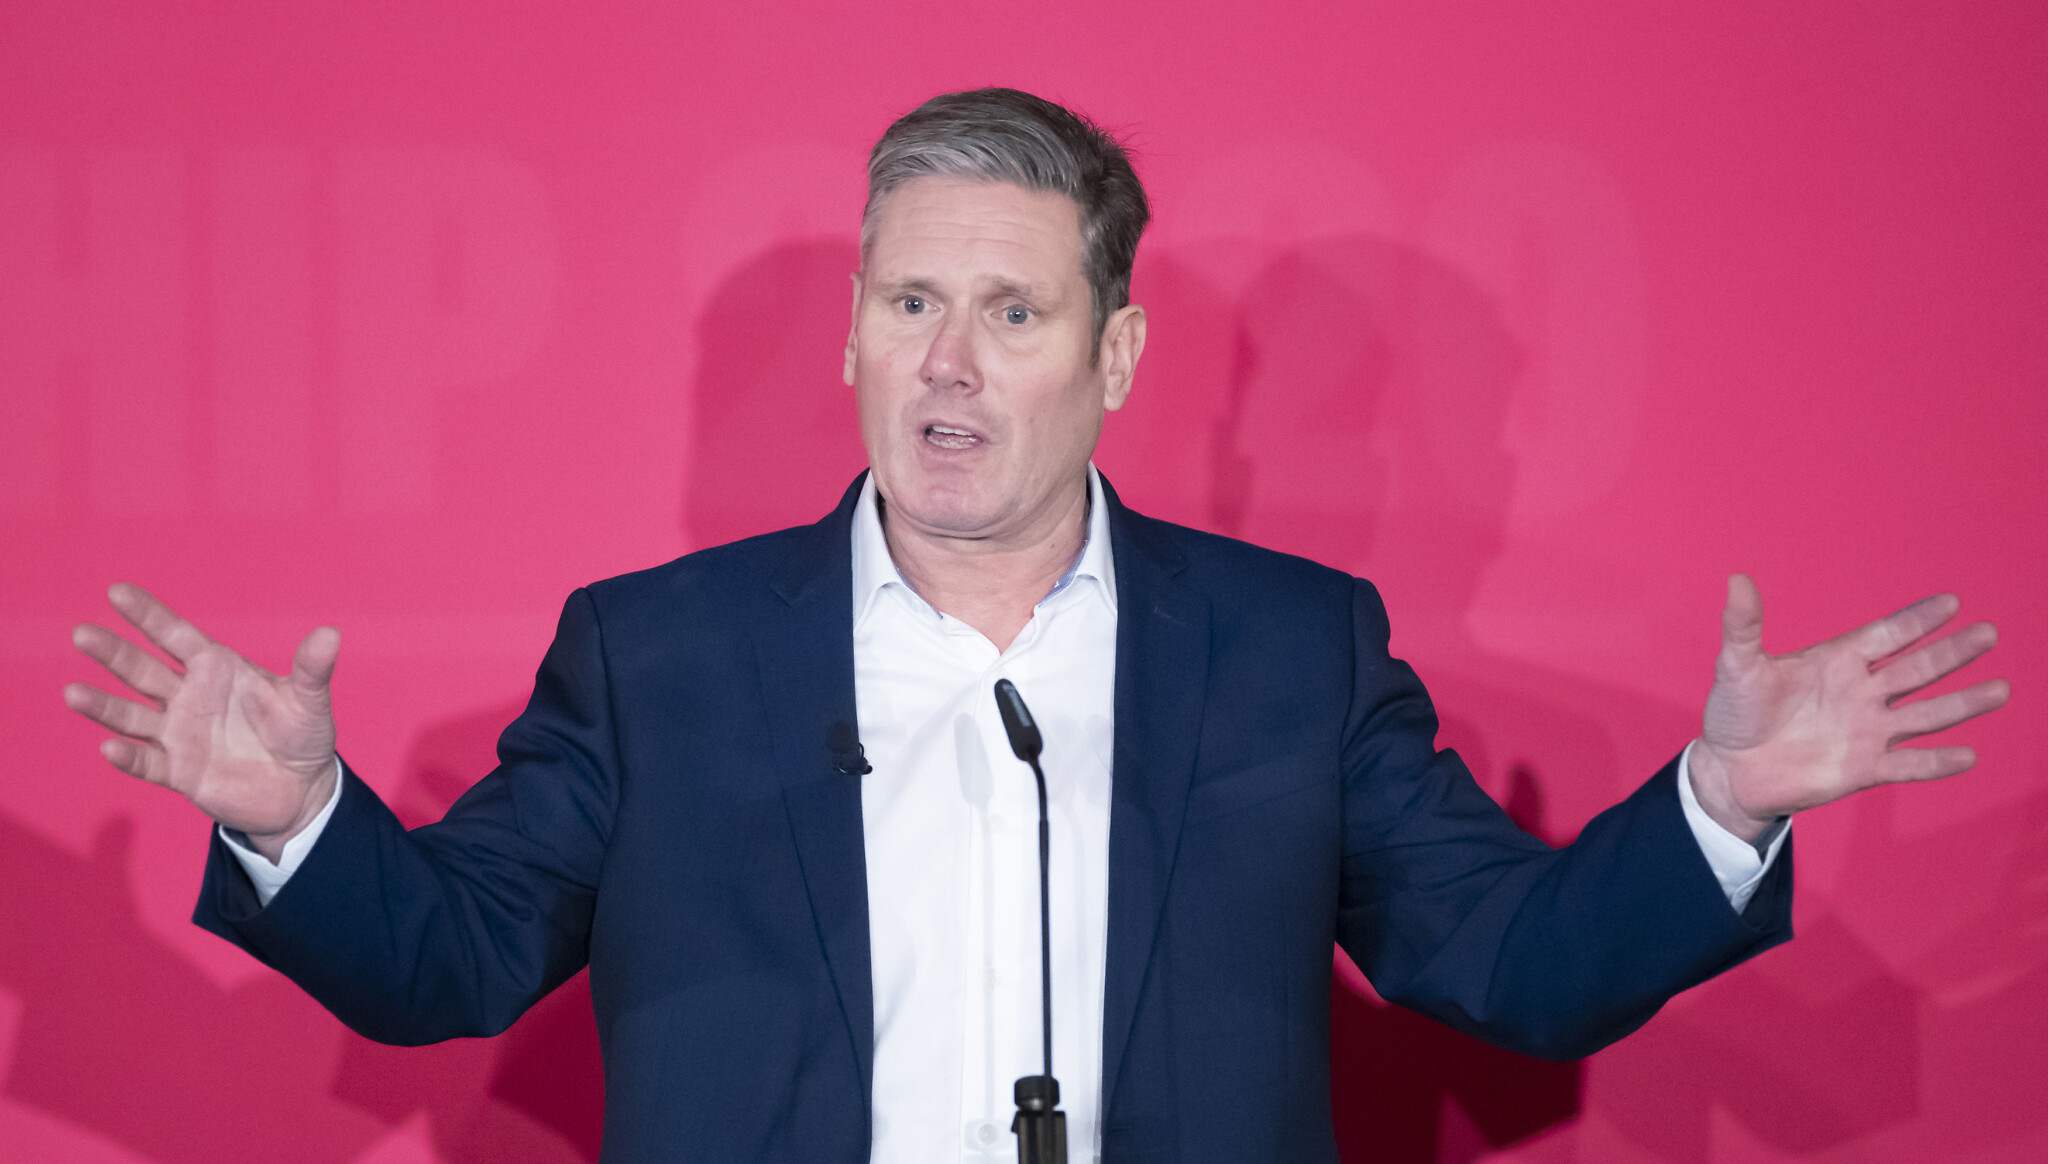 Keir Starmer vows to 'kick antisemites out' of Labour during radio phone-in | Jewish News